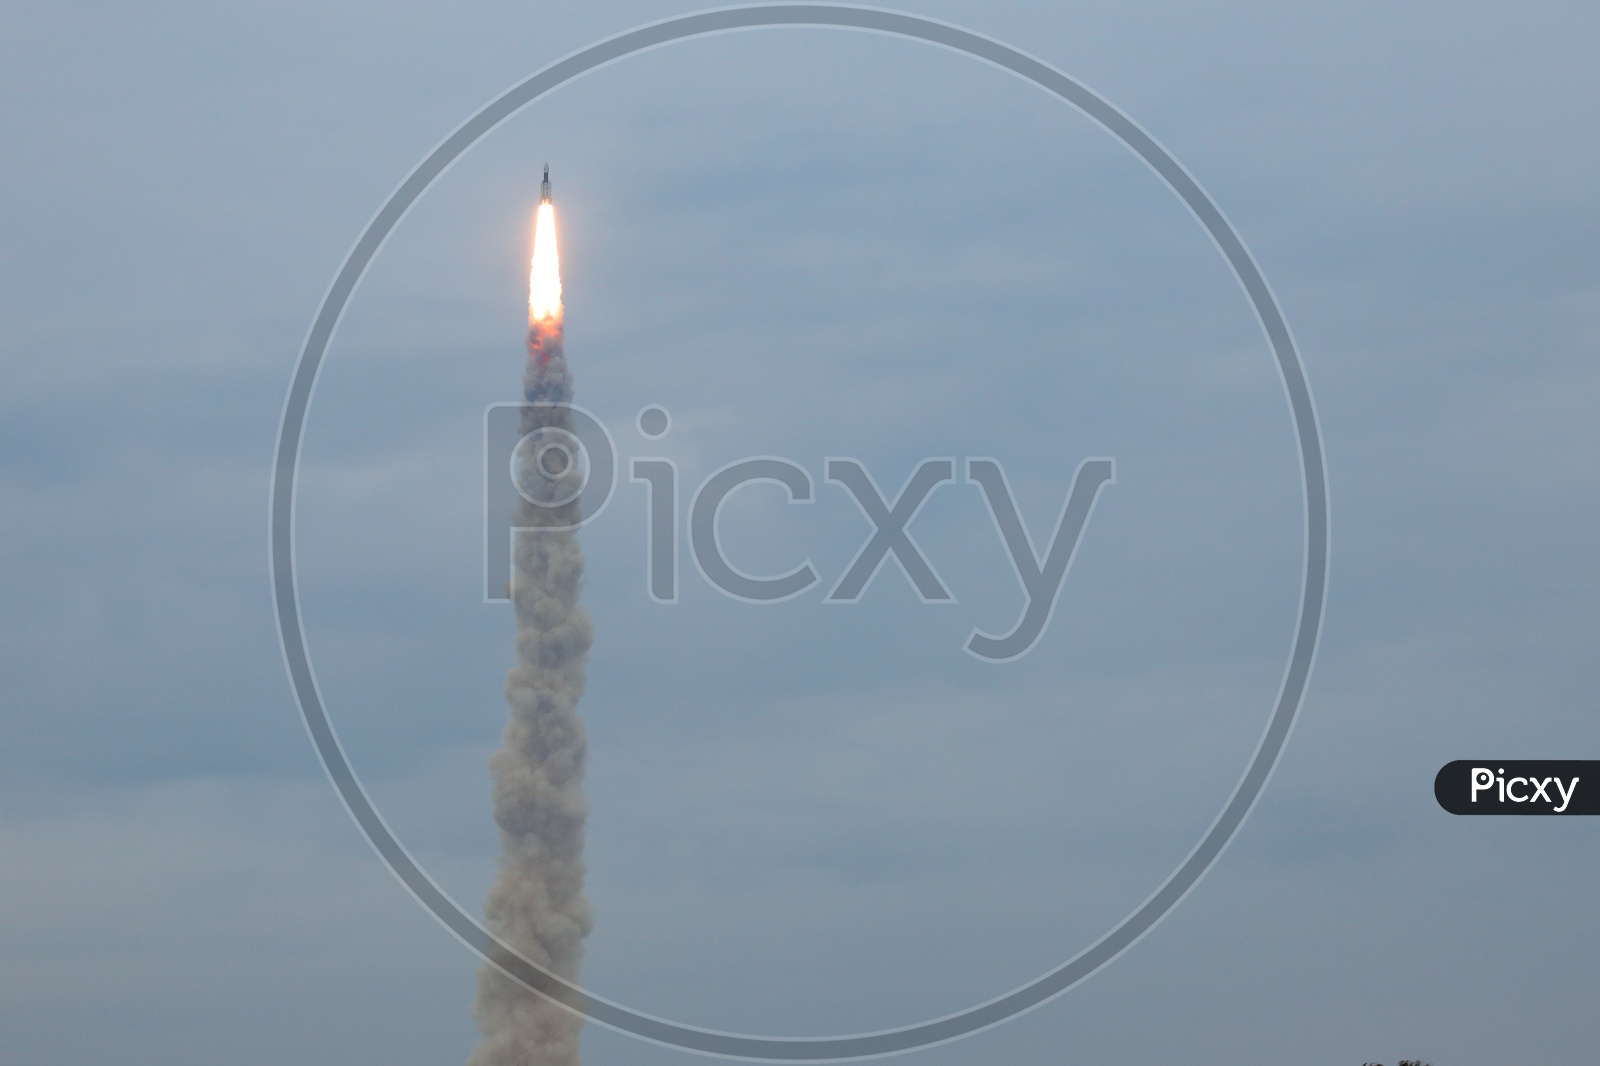 GSLV- Mk  III - M1 or Chandrayaan -2 Spacecraft or   Launch Vehicle  Taking Off From Launch Pad In Sriharikota